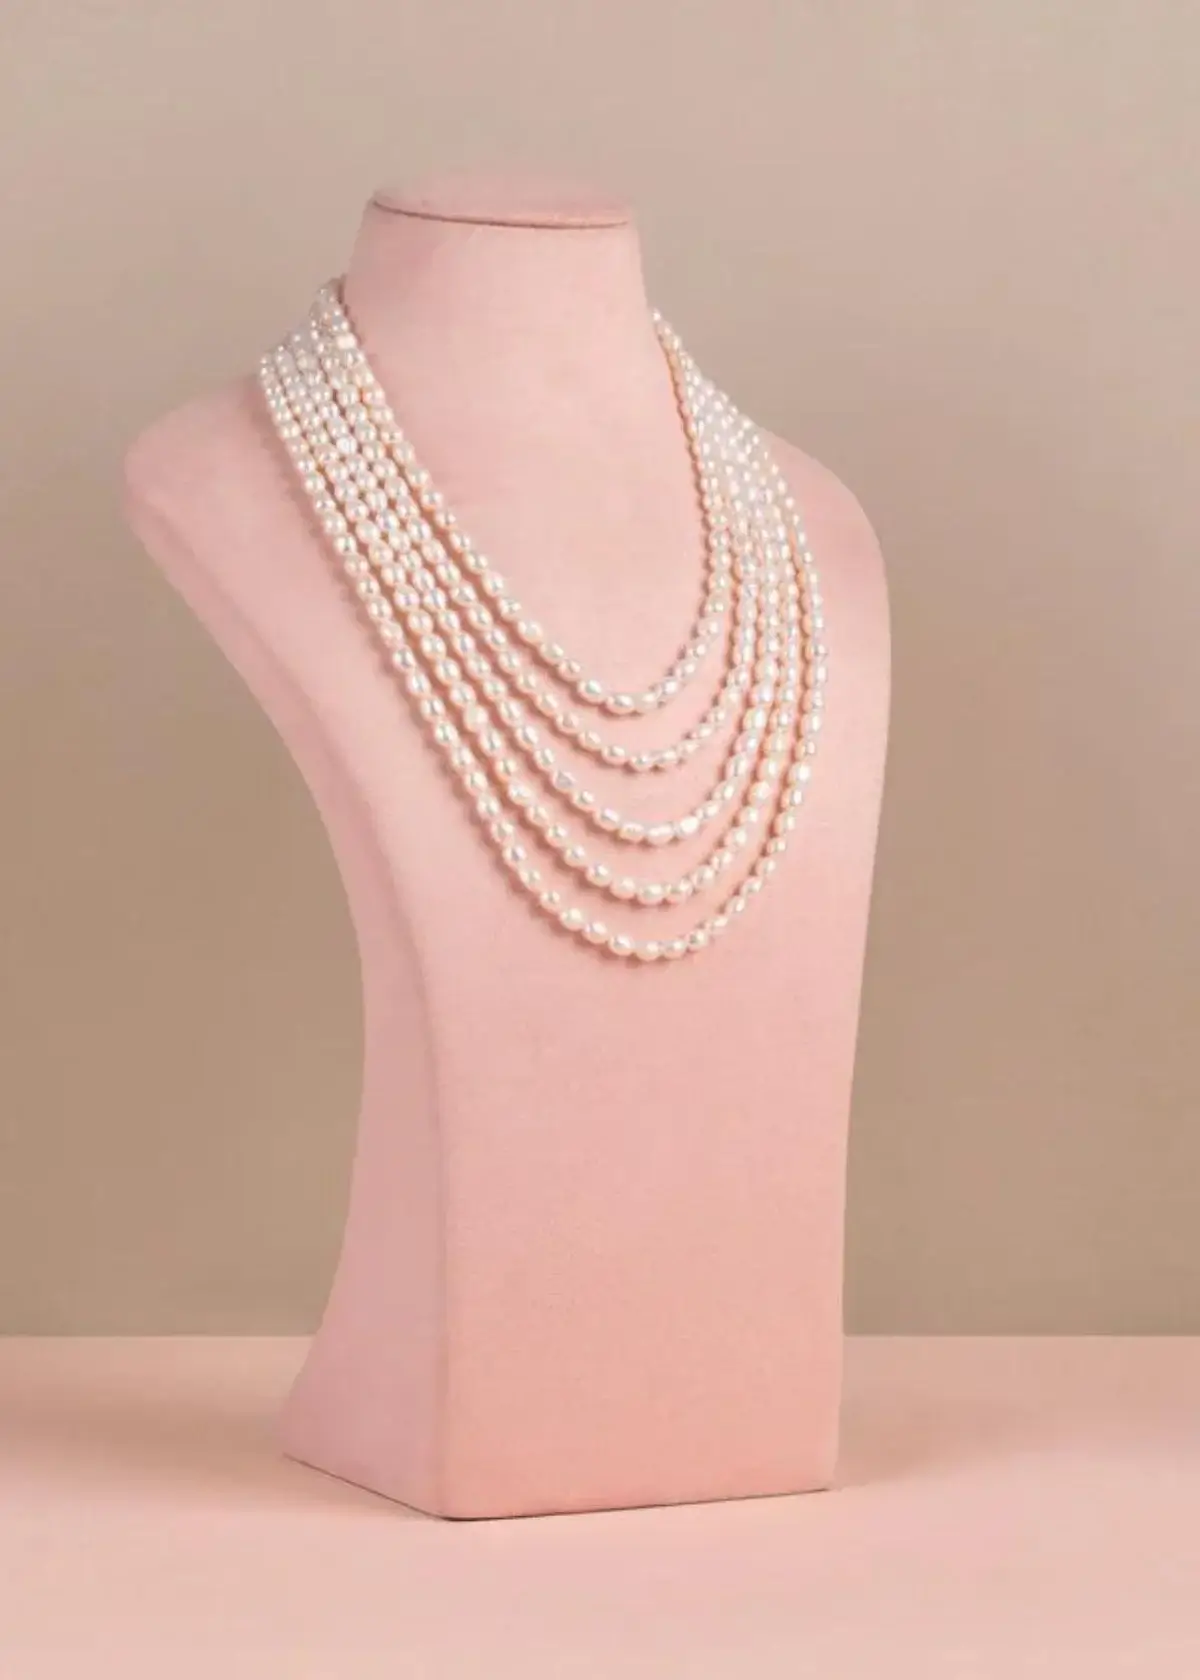 How Should I Care for My Rice Pearl Necklace?